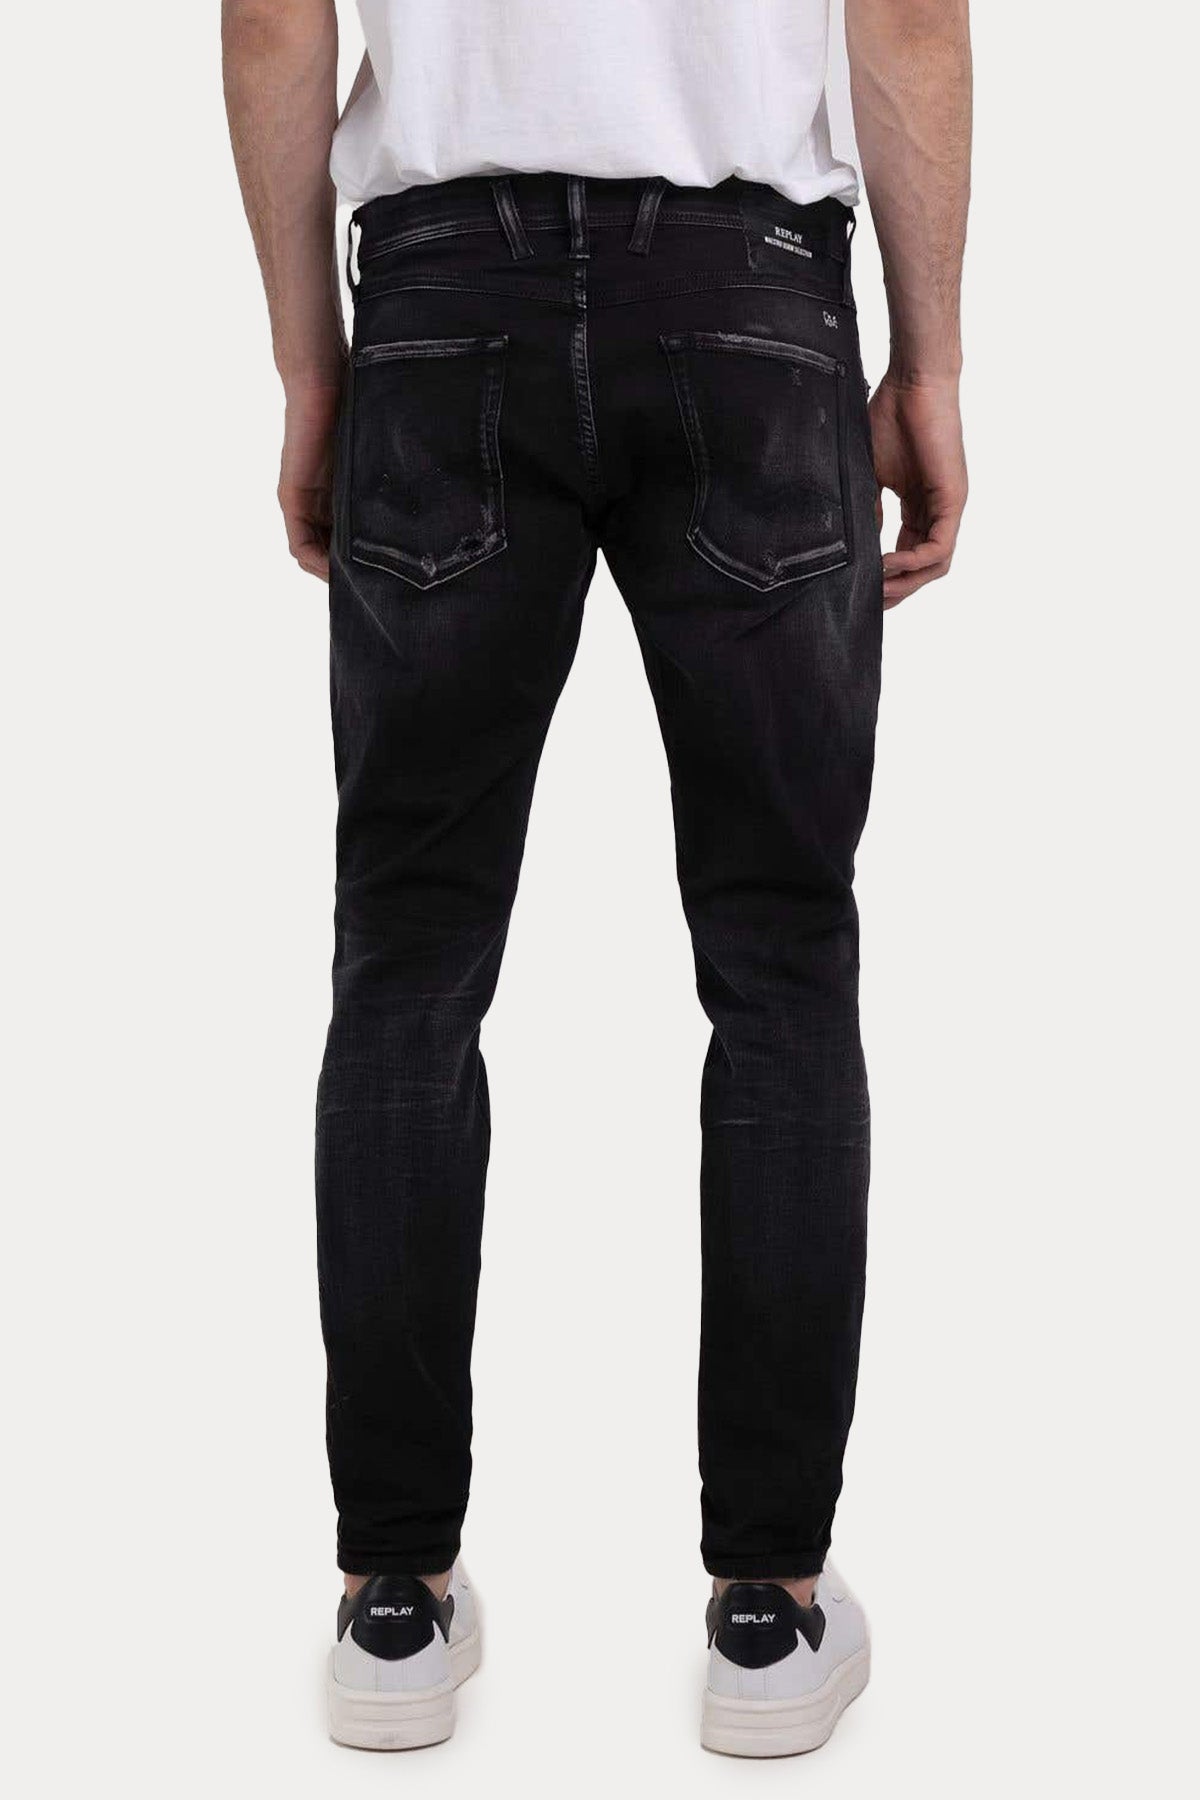 Replay Bronny Slim Fit Jeans-Libas Trendy Fashion Store